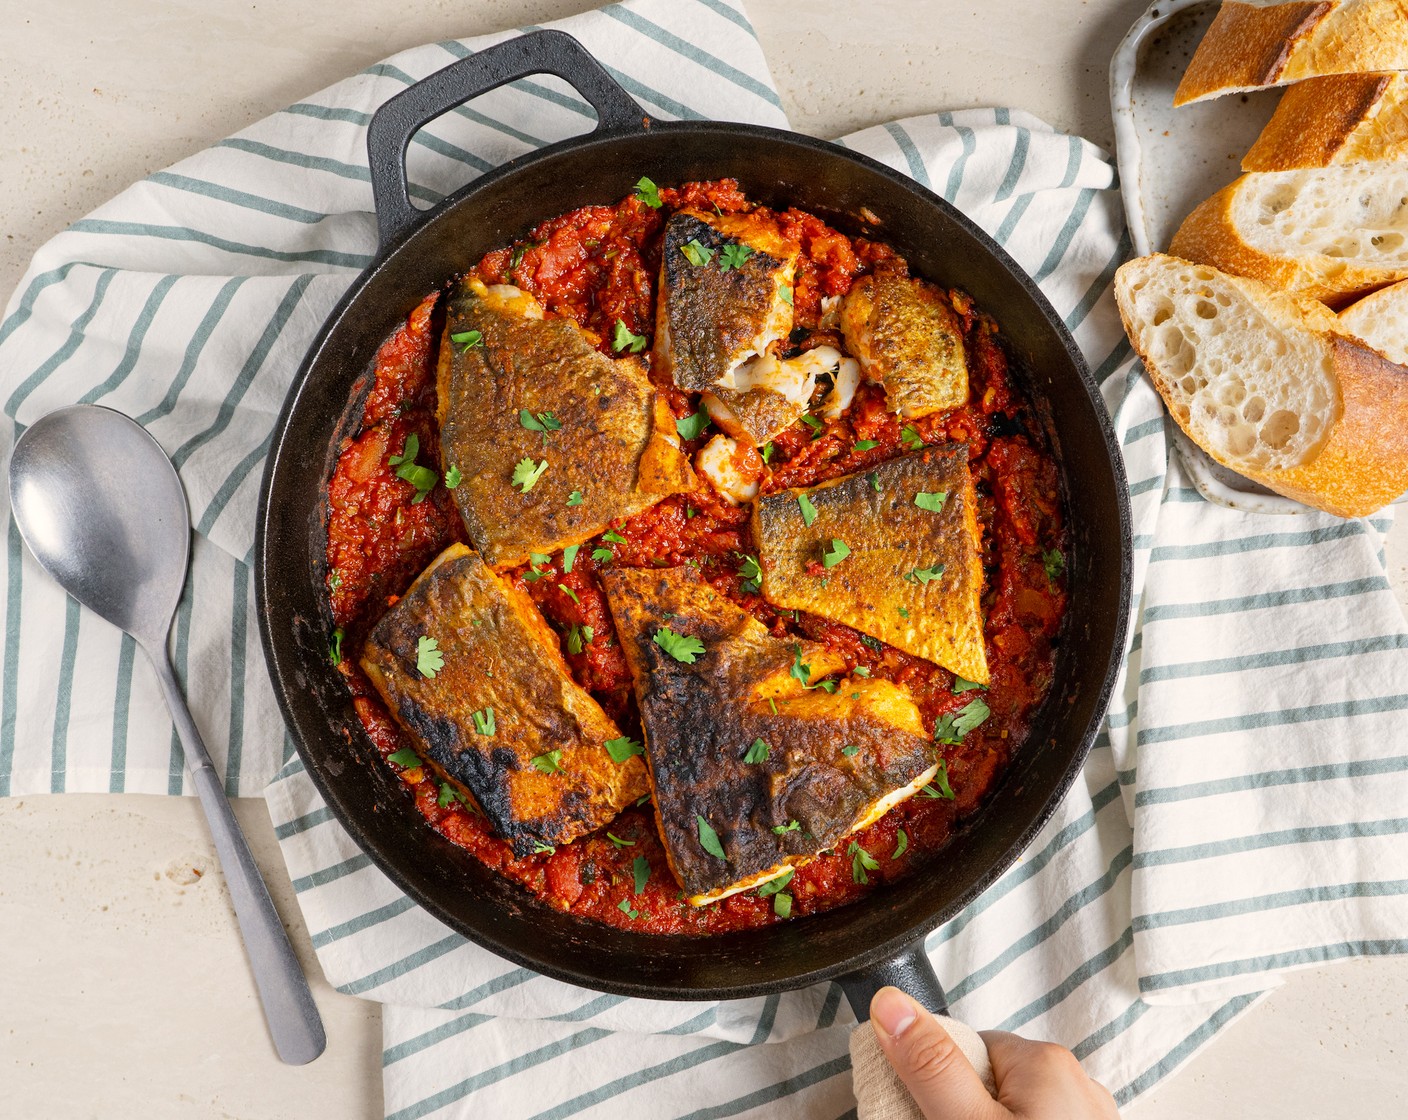 Pan Fried Fish Fillet with Spiced Tomato Sauce